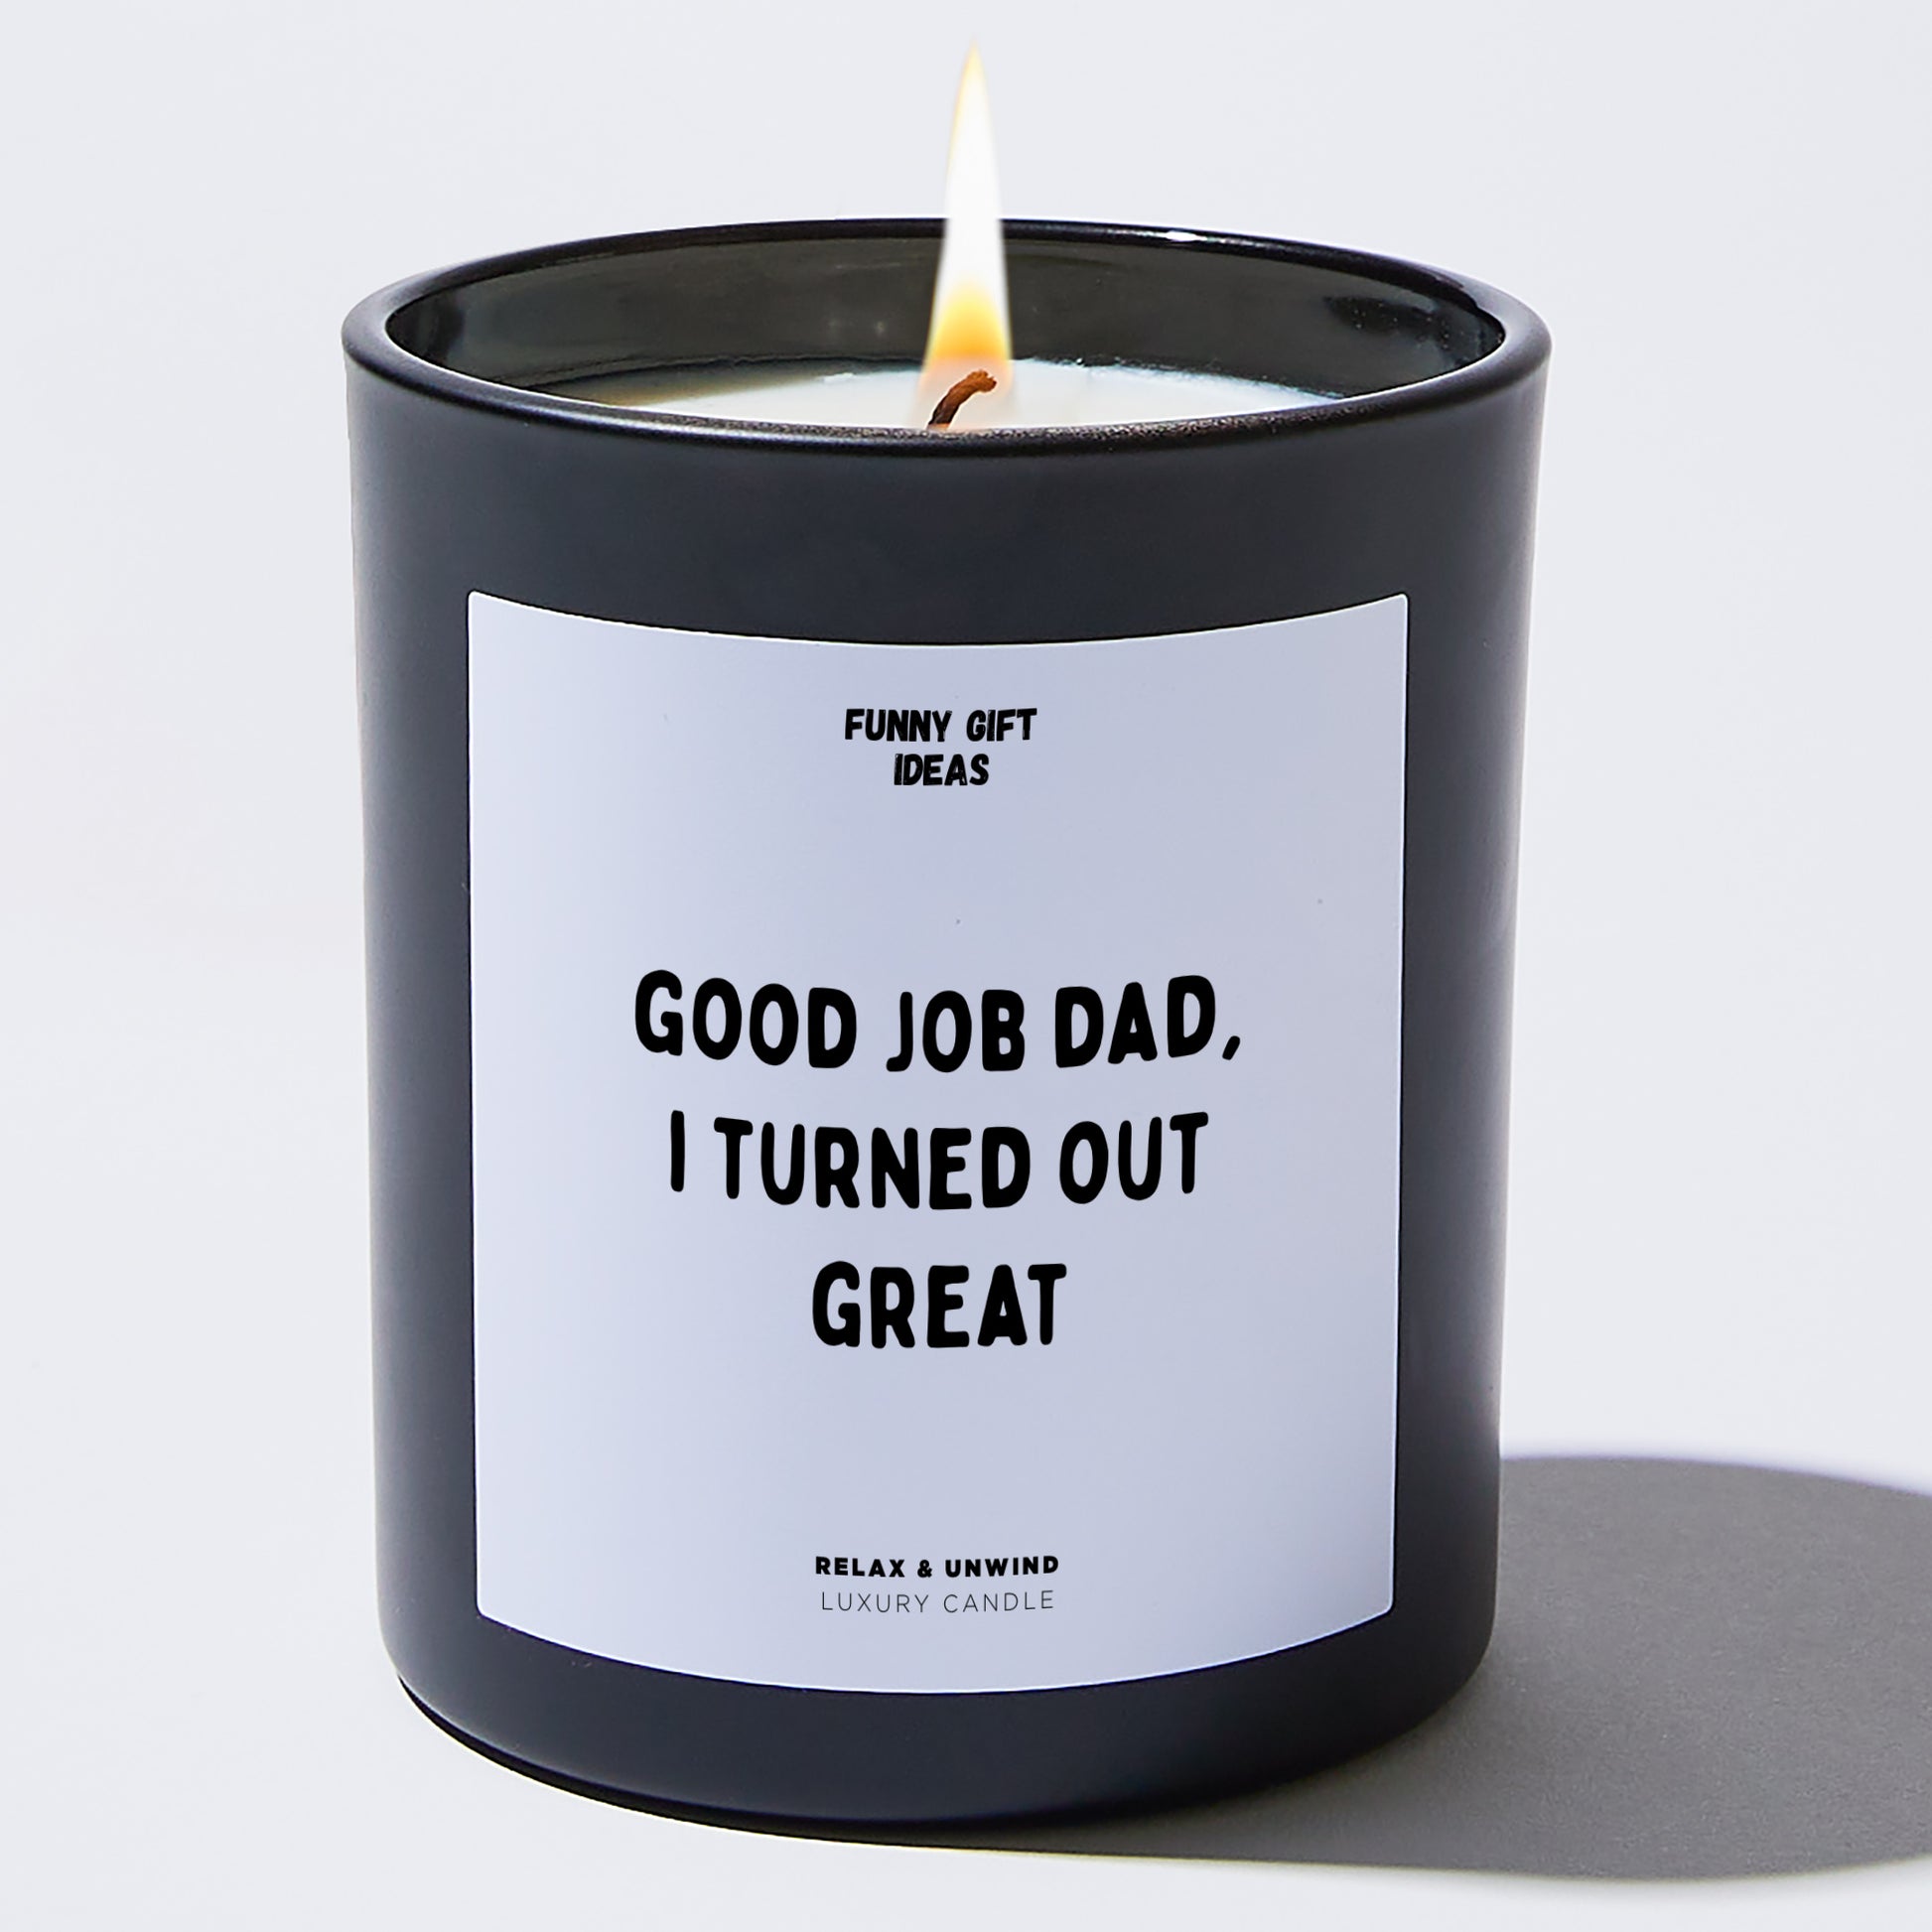 Gift for Father Good Job Dad, I Turned Out Great - Funny Gift Ideas